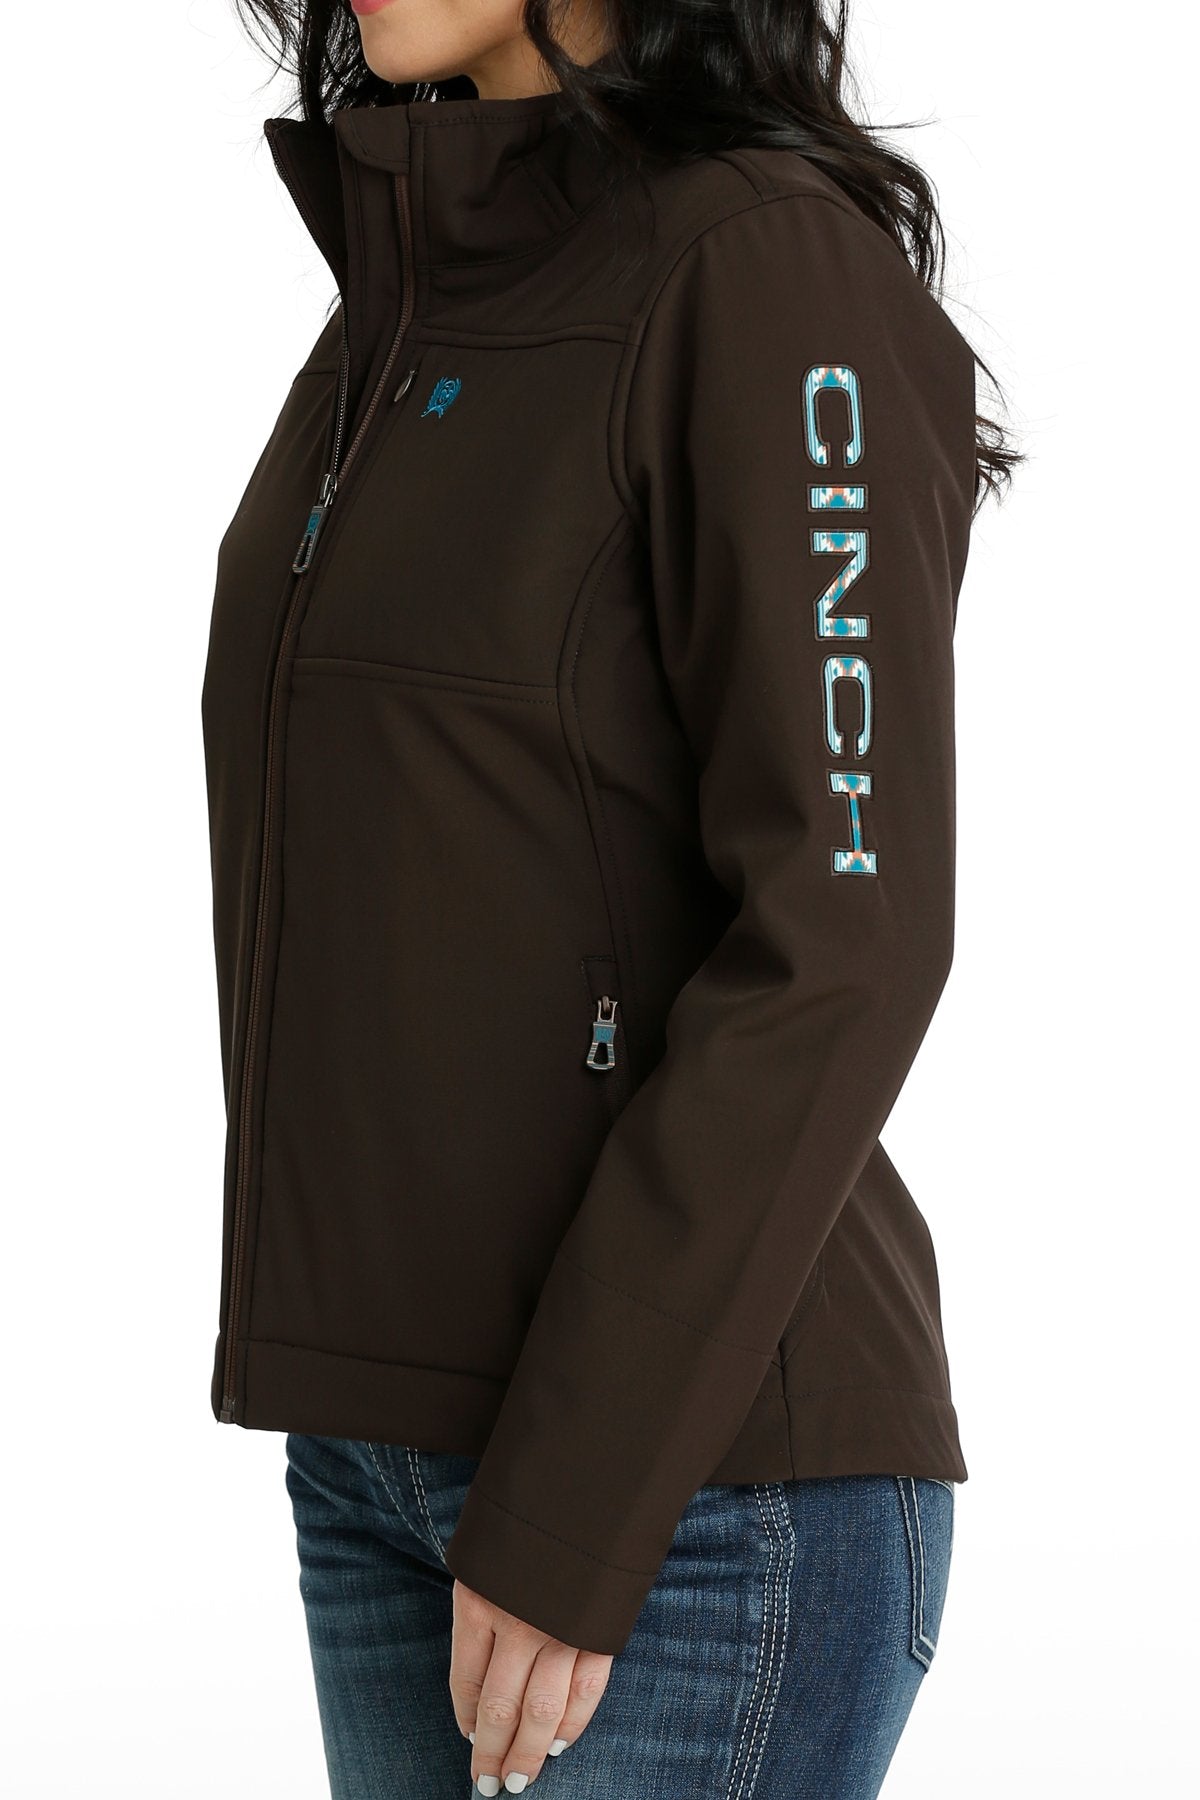 Cinch - Women's Concealed Carry Bonded Jacket